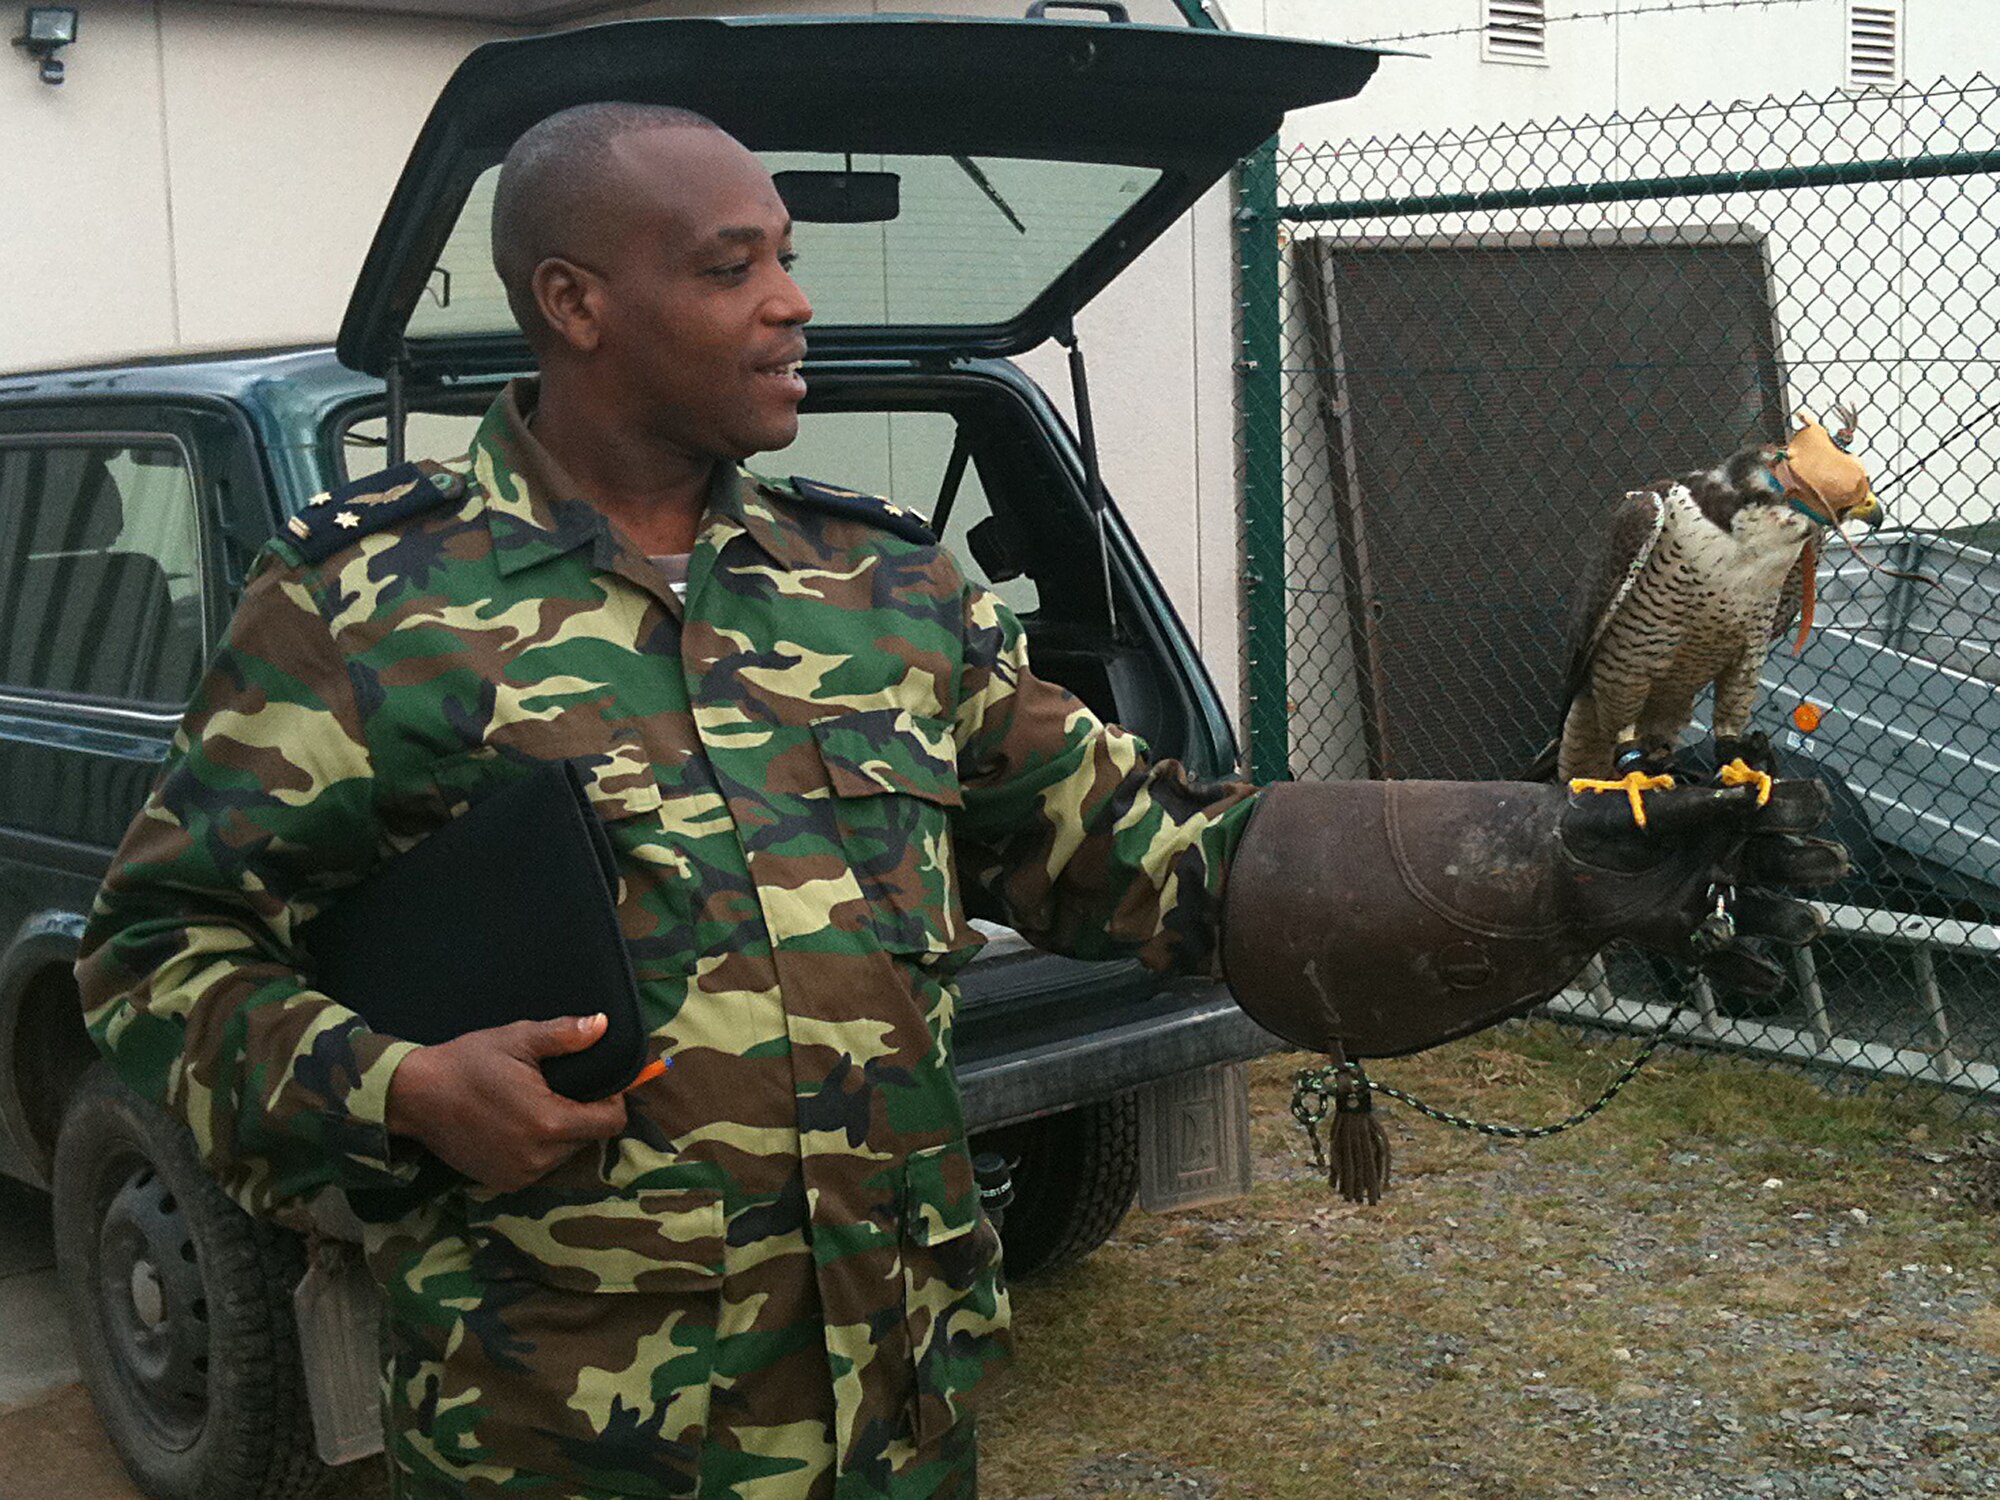 Burundian air force Lt. Col. Prime Yamuremye, holds a falcon used for the Bird Aircraft Strike Hazard flight safety program during a visit toRamstein Air Base, Germany, March 8, 2012. Four Burundian air force members came to Ramstein to get familiarized with the airfield, ground and flight-safety programs the U.S. Air Force uses. (U.S. Air Force photo/Staff Sgt. Travis Edwards)